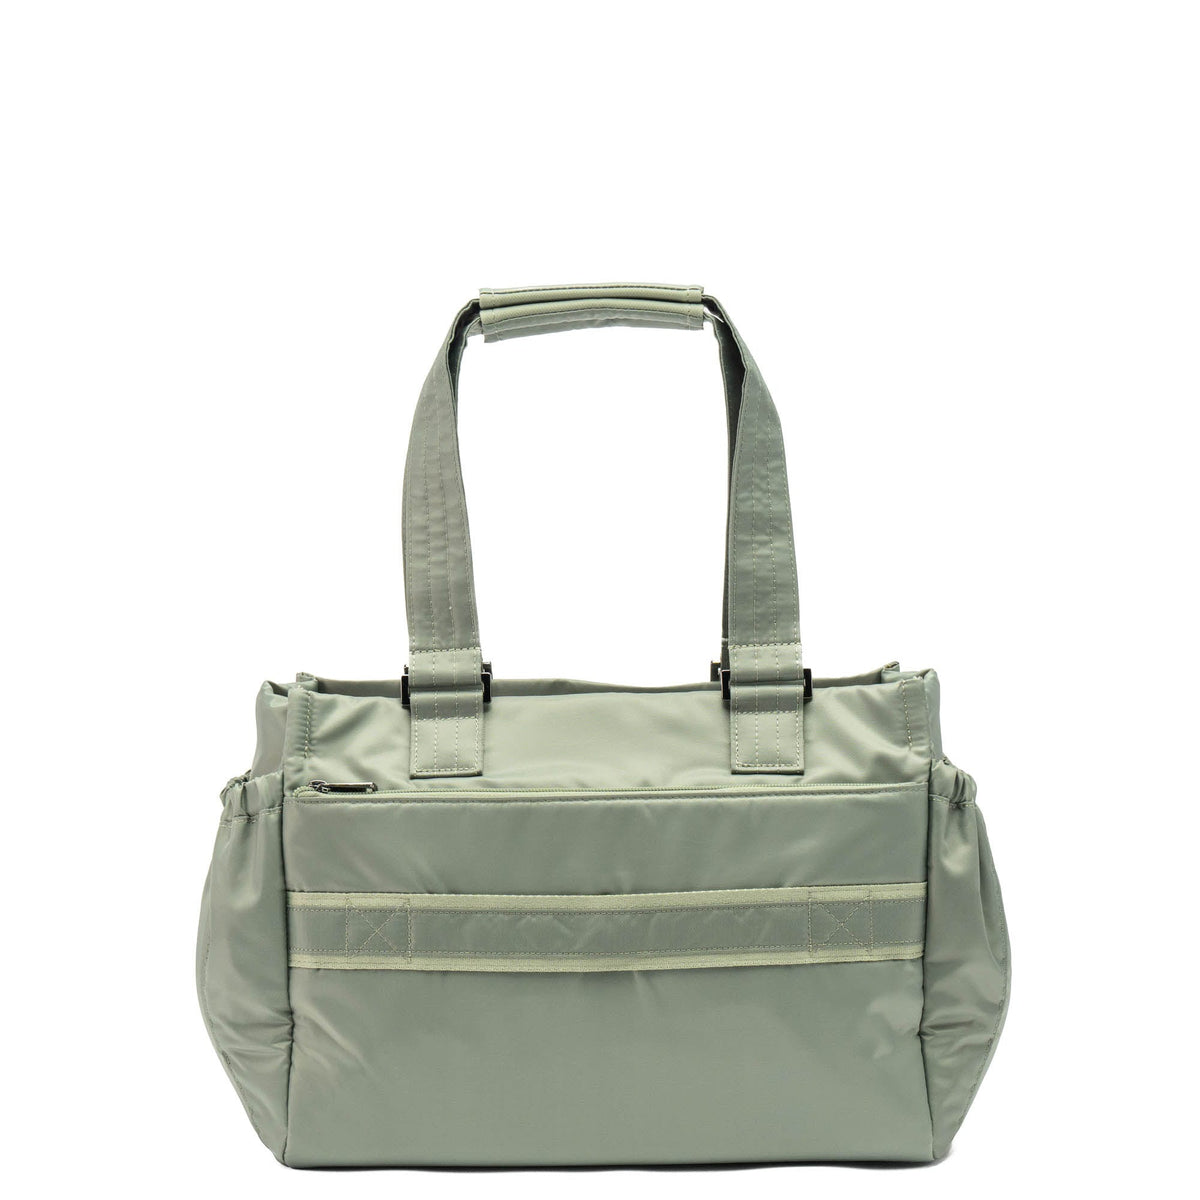 Dilly Dally Convertible Tote Bag - Luglife.com